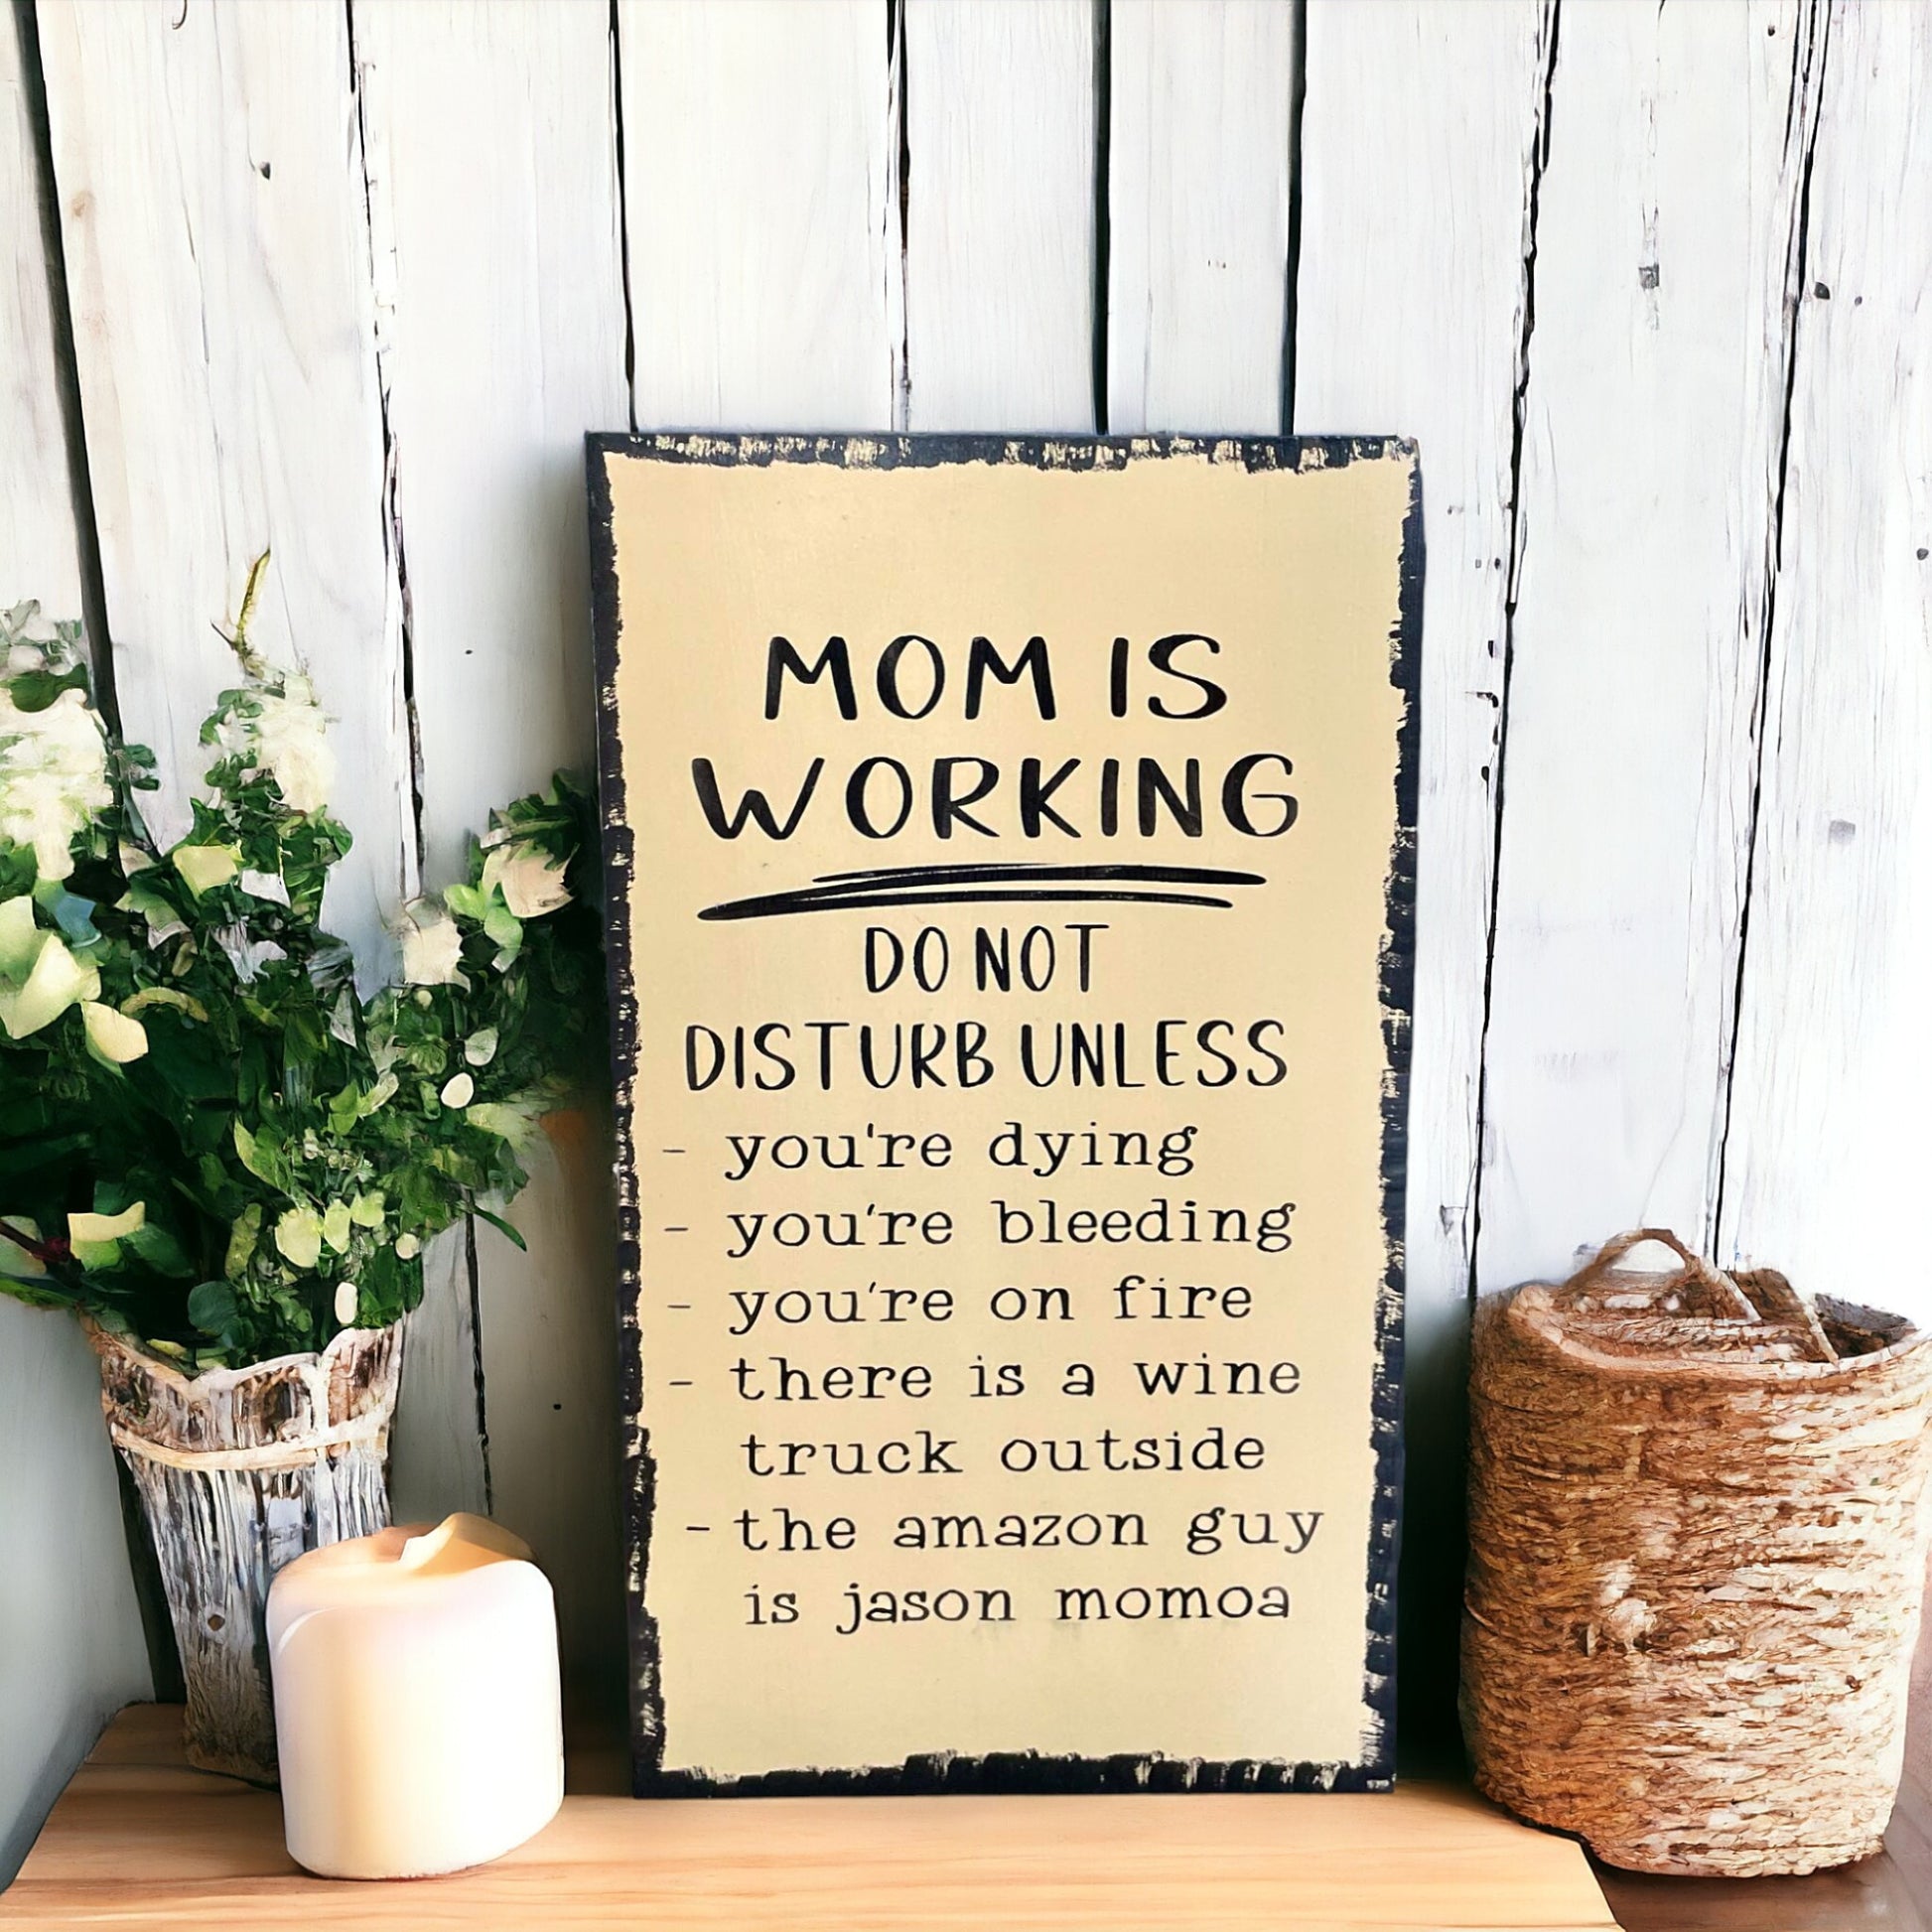 Humorous 'Mom Is Working Do Not Disturb' wooden sign for home office decor